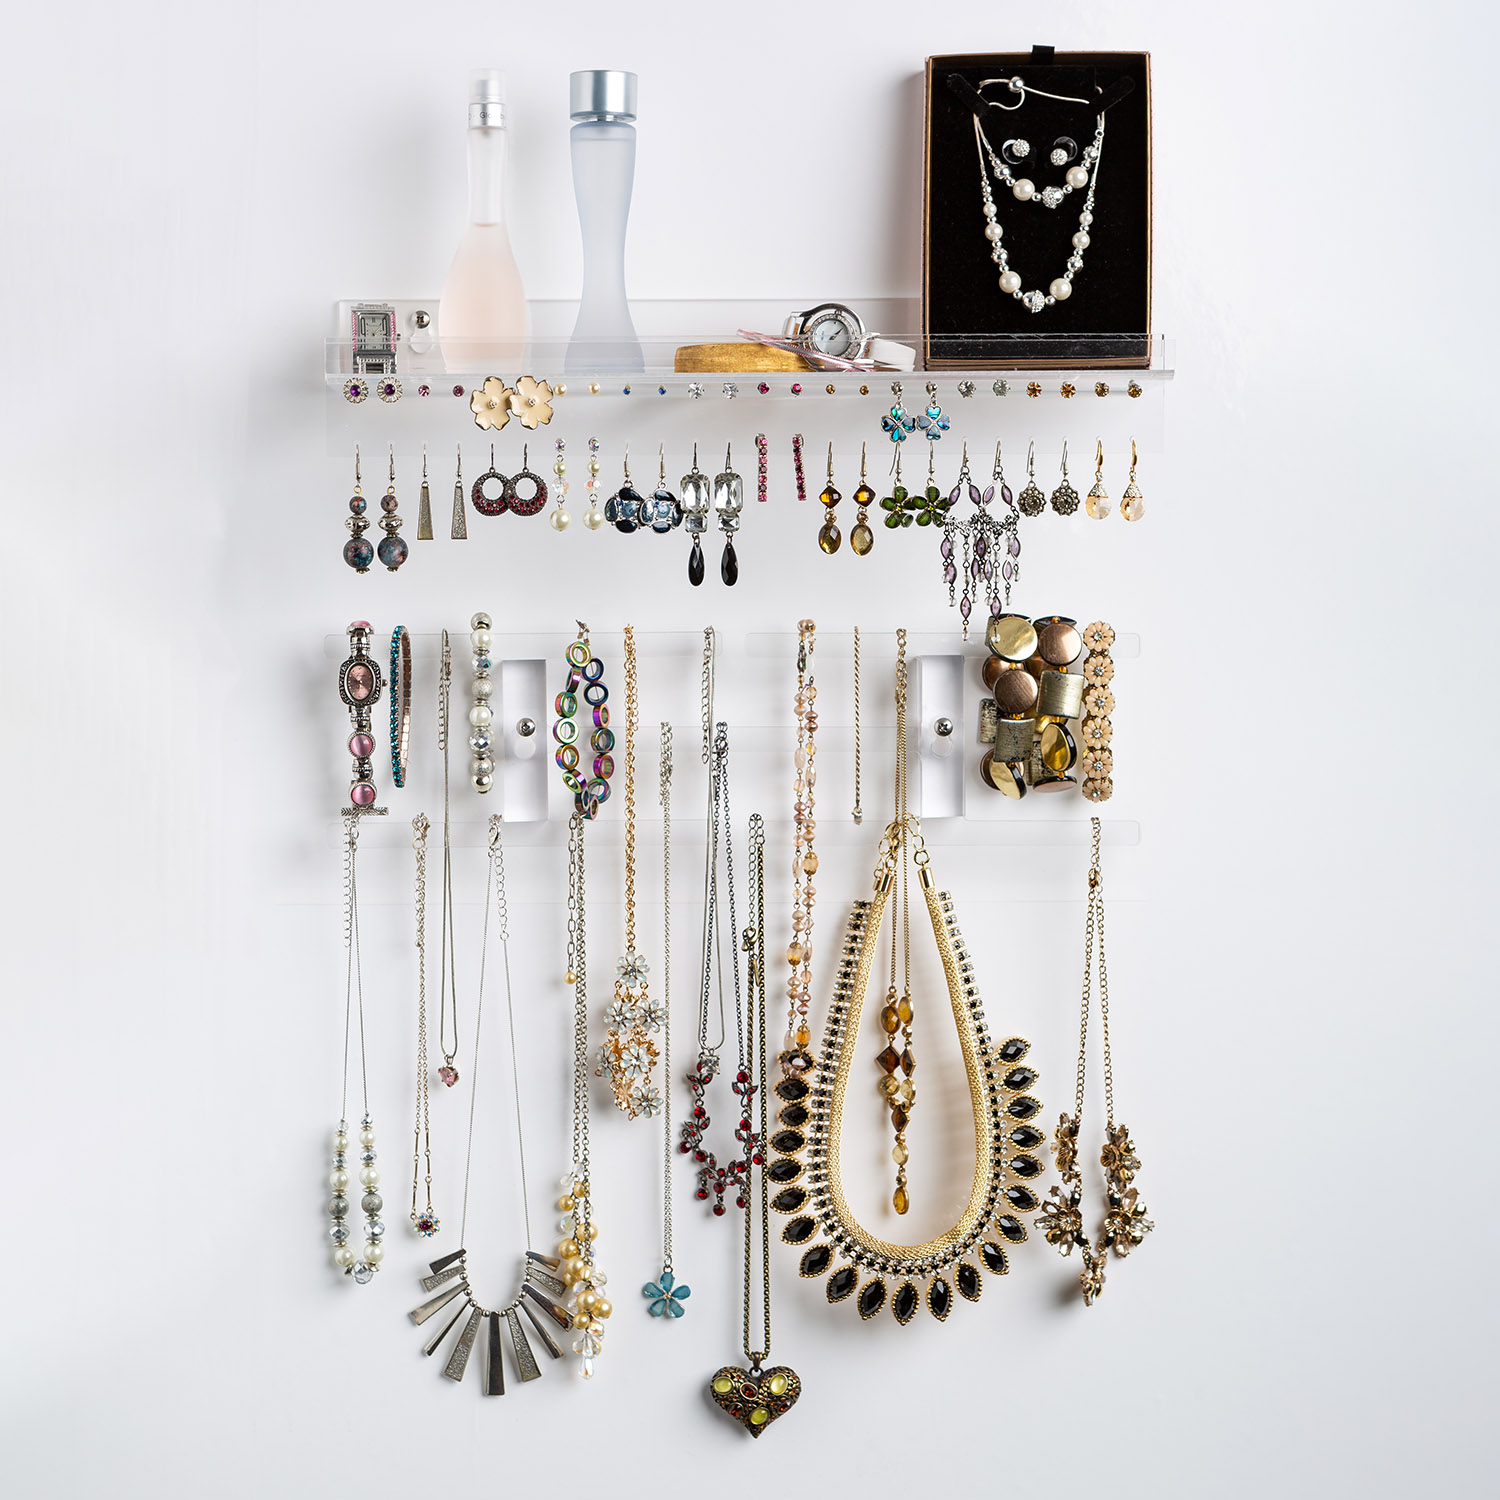 Wall Jewelry Organizer, Hanging Crystal-Clear Acrylic Jewelry Holder with  Shelf, Wall Mounted, to Display Necklaces, Earrings & Accessories